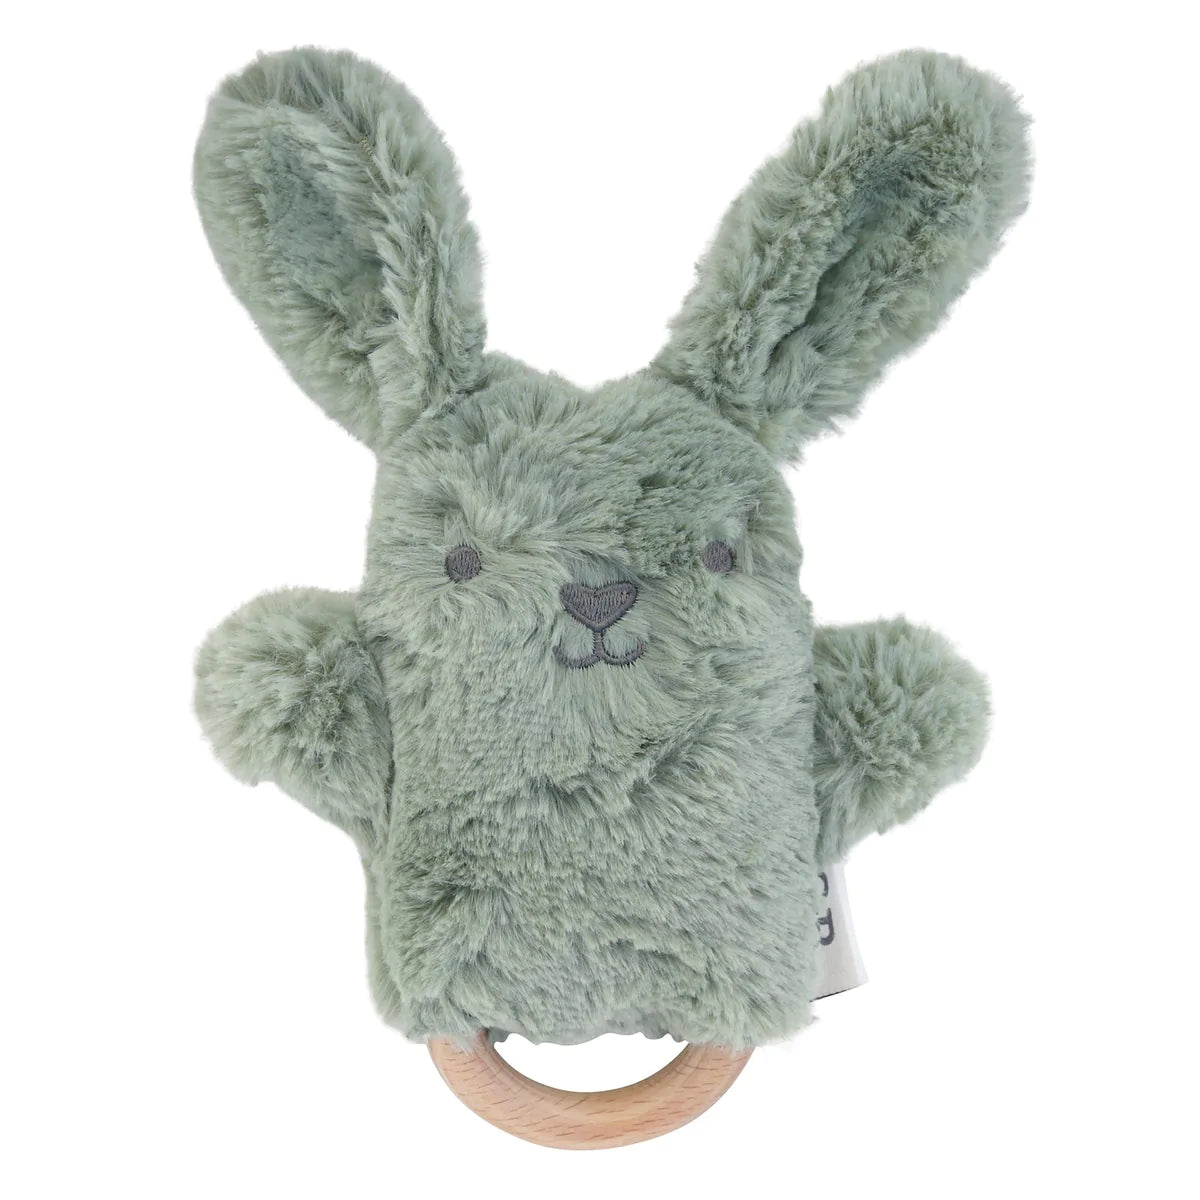 Soft Rattle Toy Beau Bunny